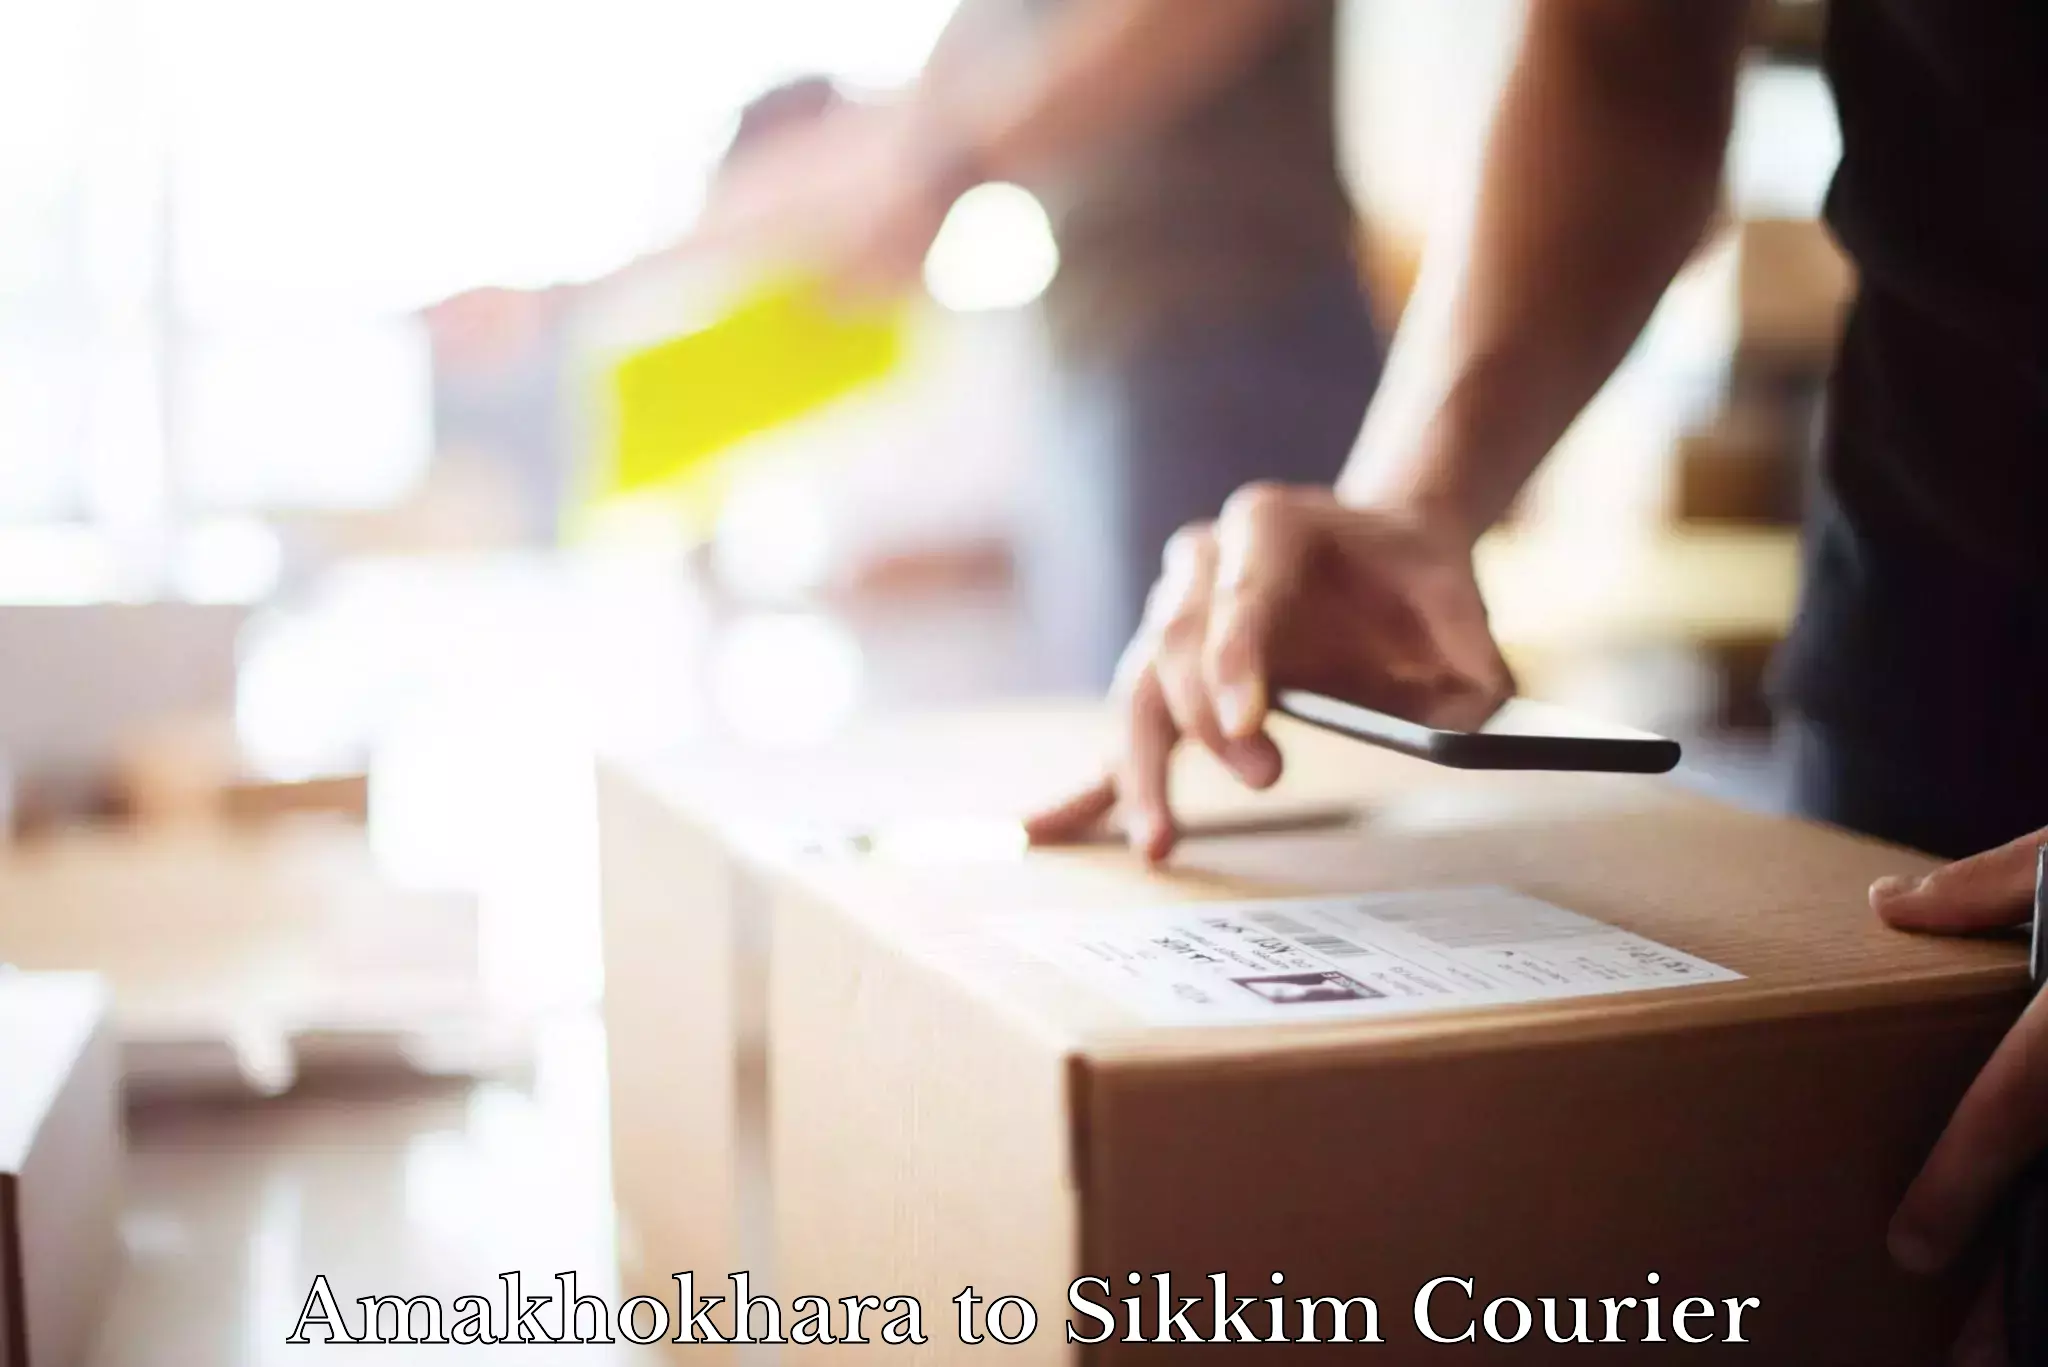 Efficient shipping operations in Amakhokhara to Sikkim